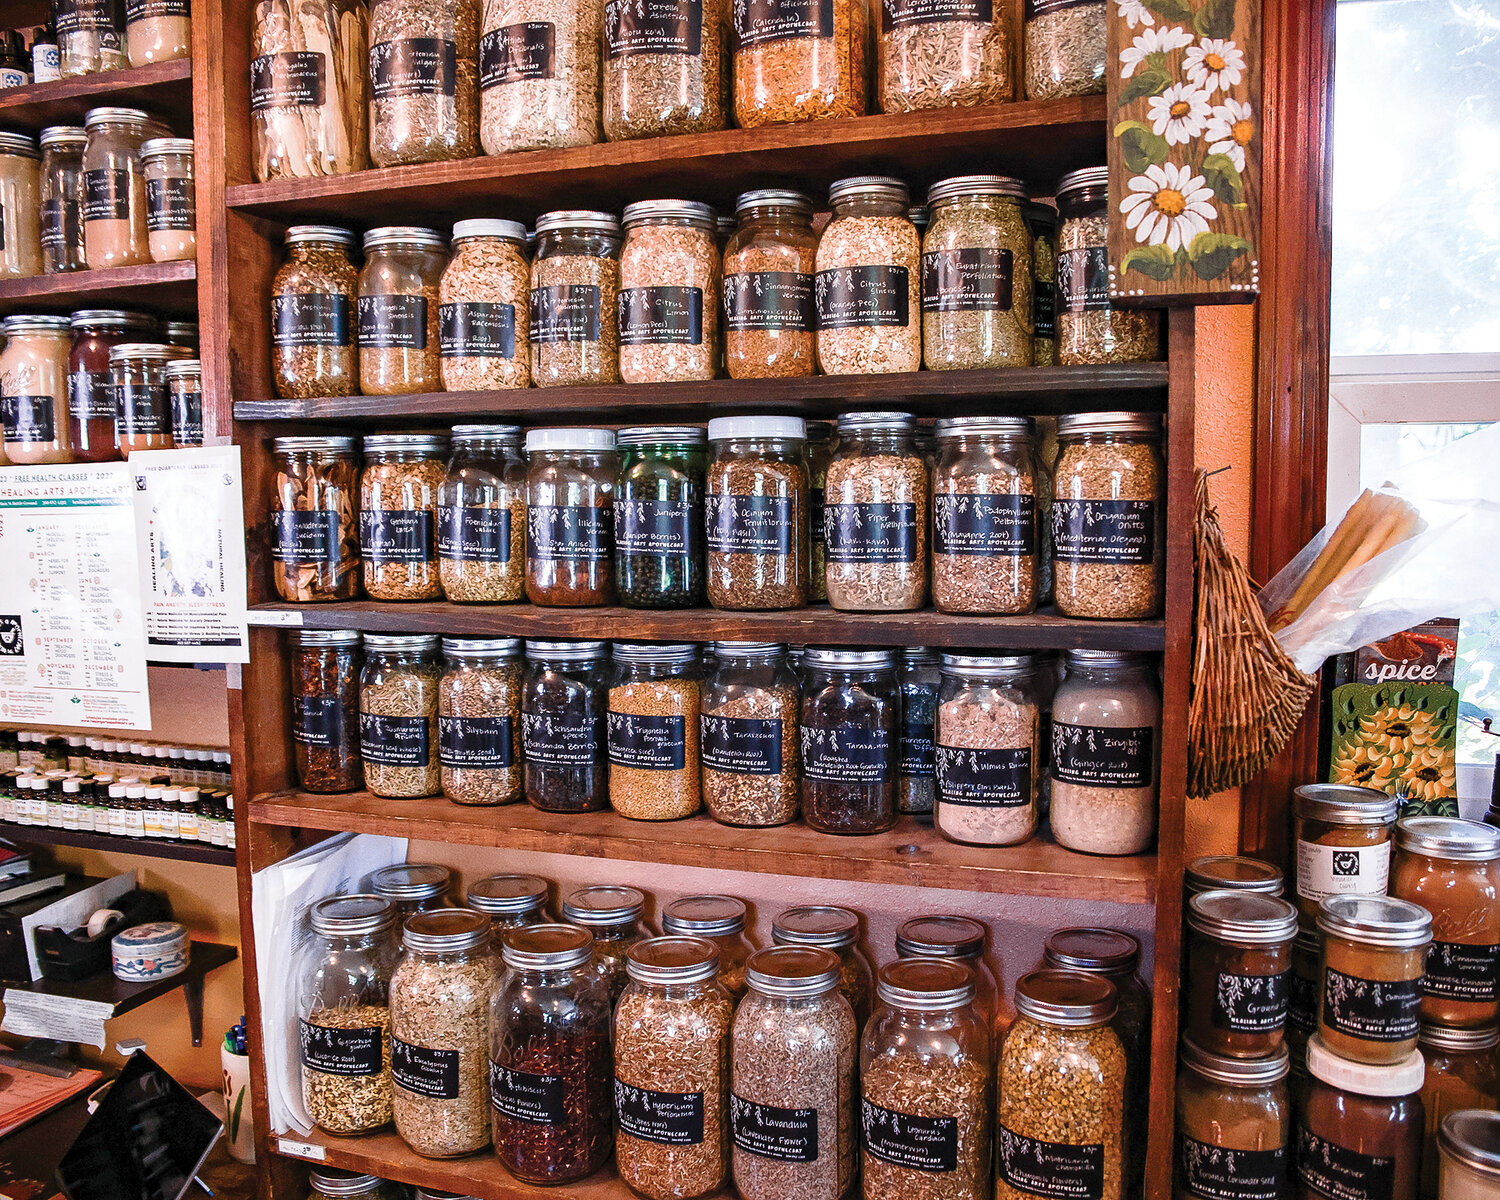 The wall of herbs is pictured on Tuesday, July 18 at the Battle Ground Healing Arts and Apothecary.